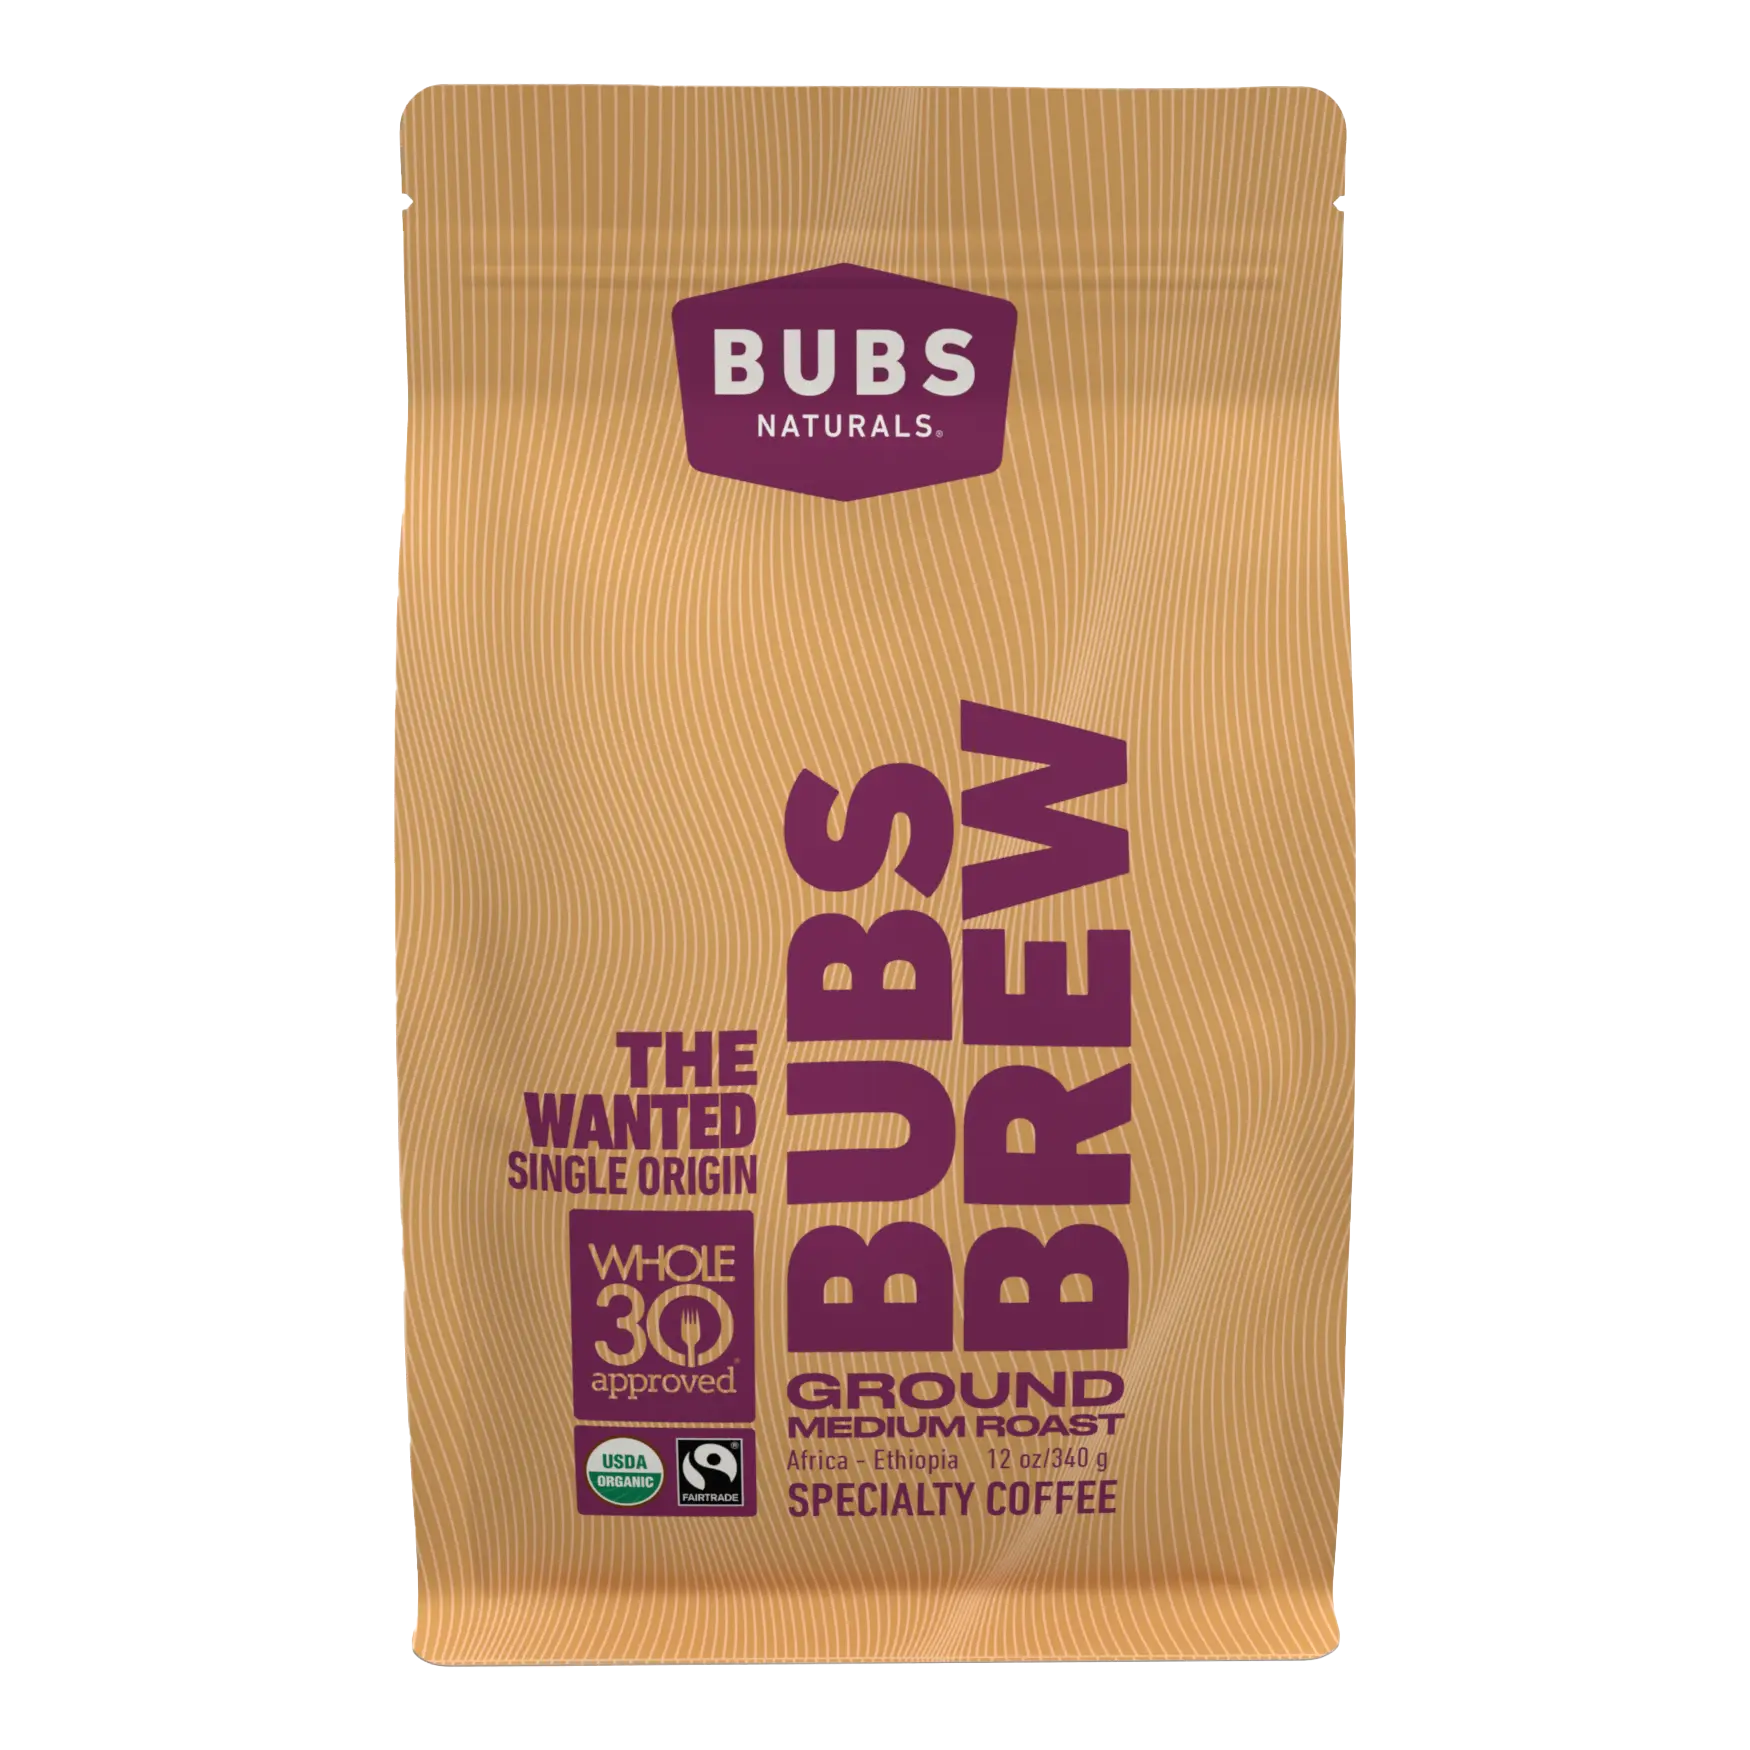 Bubs Naturals Mix Wand - Handheld Milk Frother - Lattes, Coffee, Cappuccino, Frappes, Hot Chocolate Blender - Portable Protein Powder, Omelet, Egg, Sh